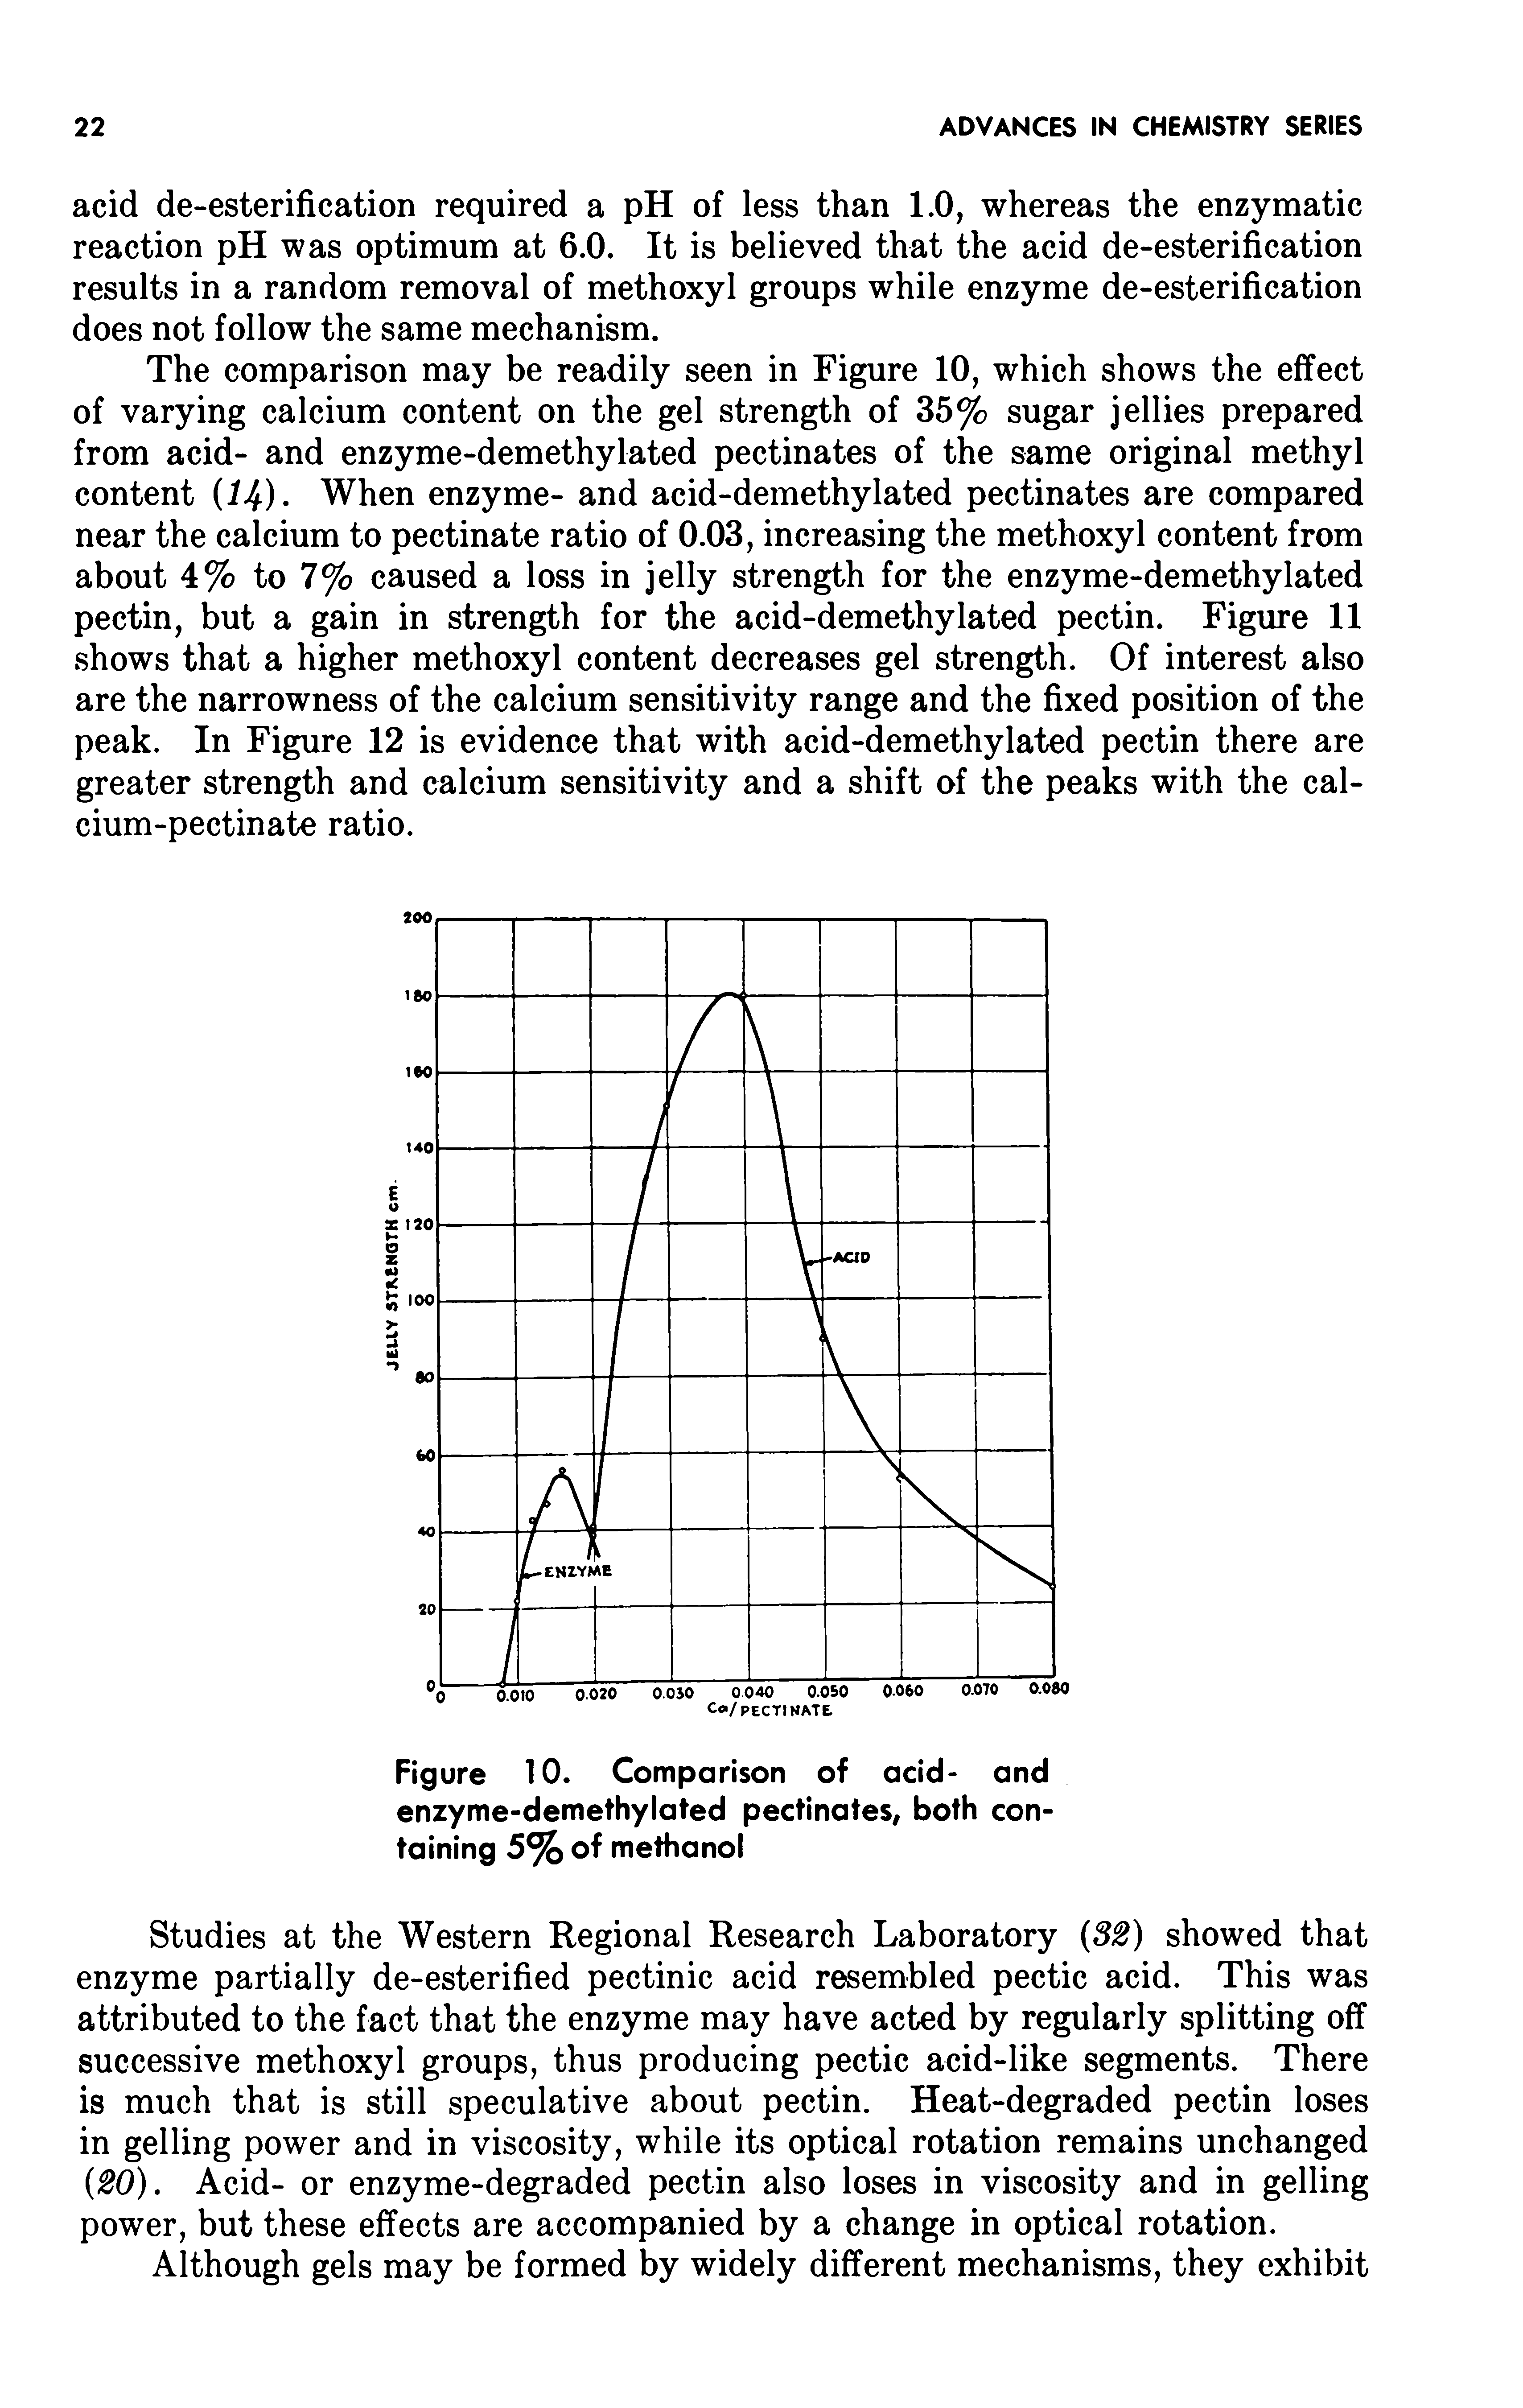 Figure 10. Comparison of acid- and enzyme-demethylated pectinates, both containing 5% of methanol...